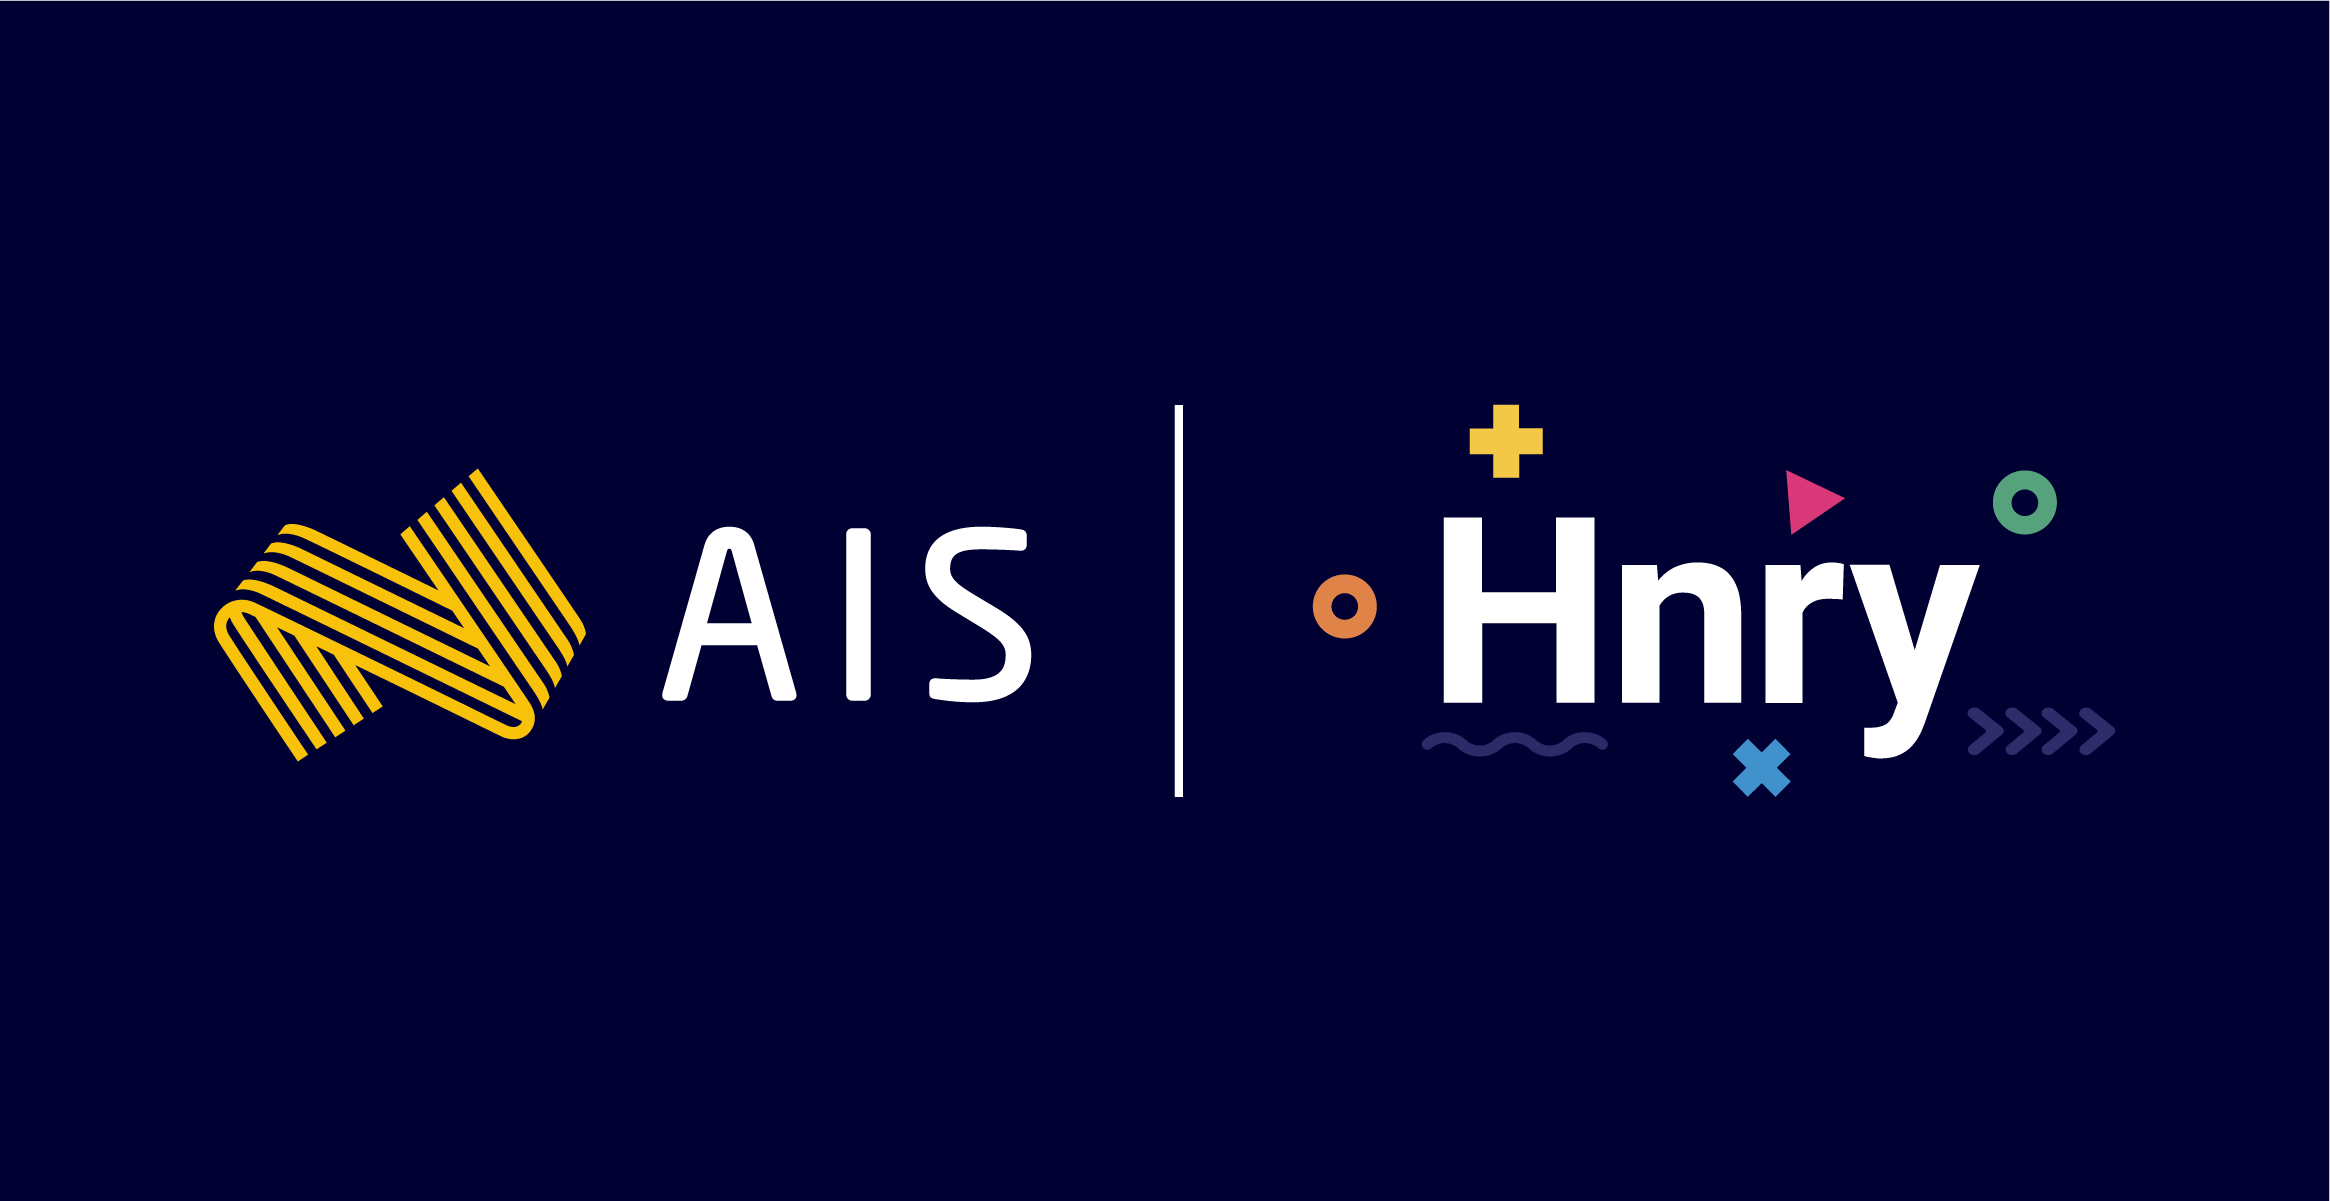 AIS and Hnry logos side by side